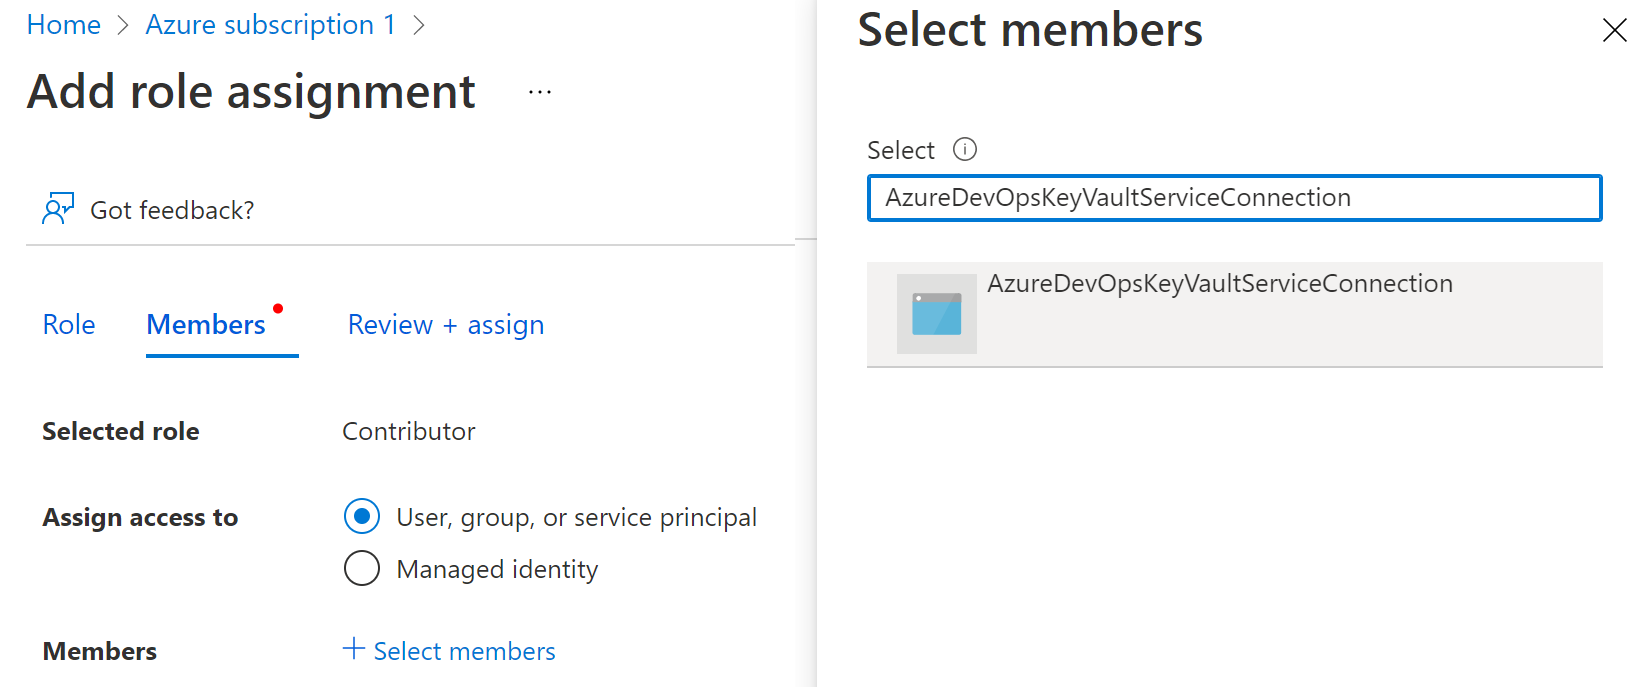 (Fig 3. azure subscription role assignment)